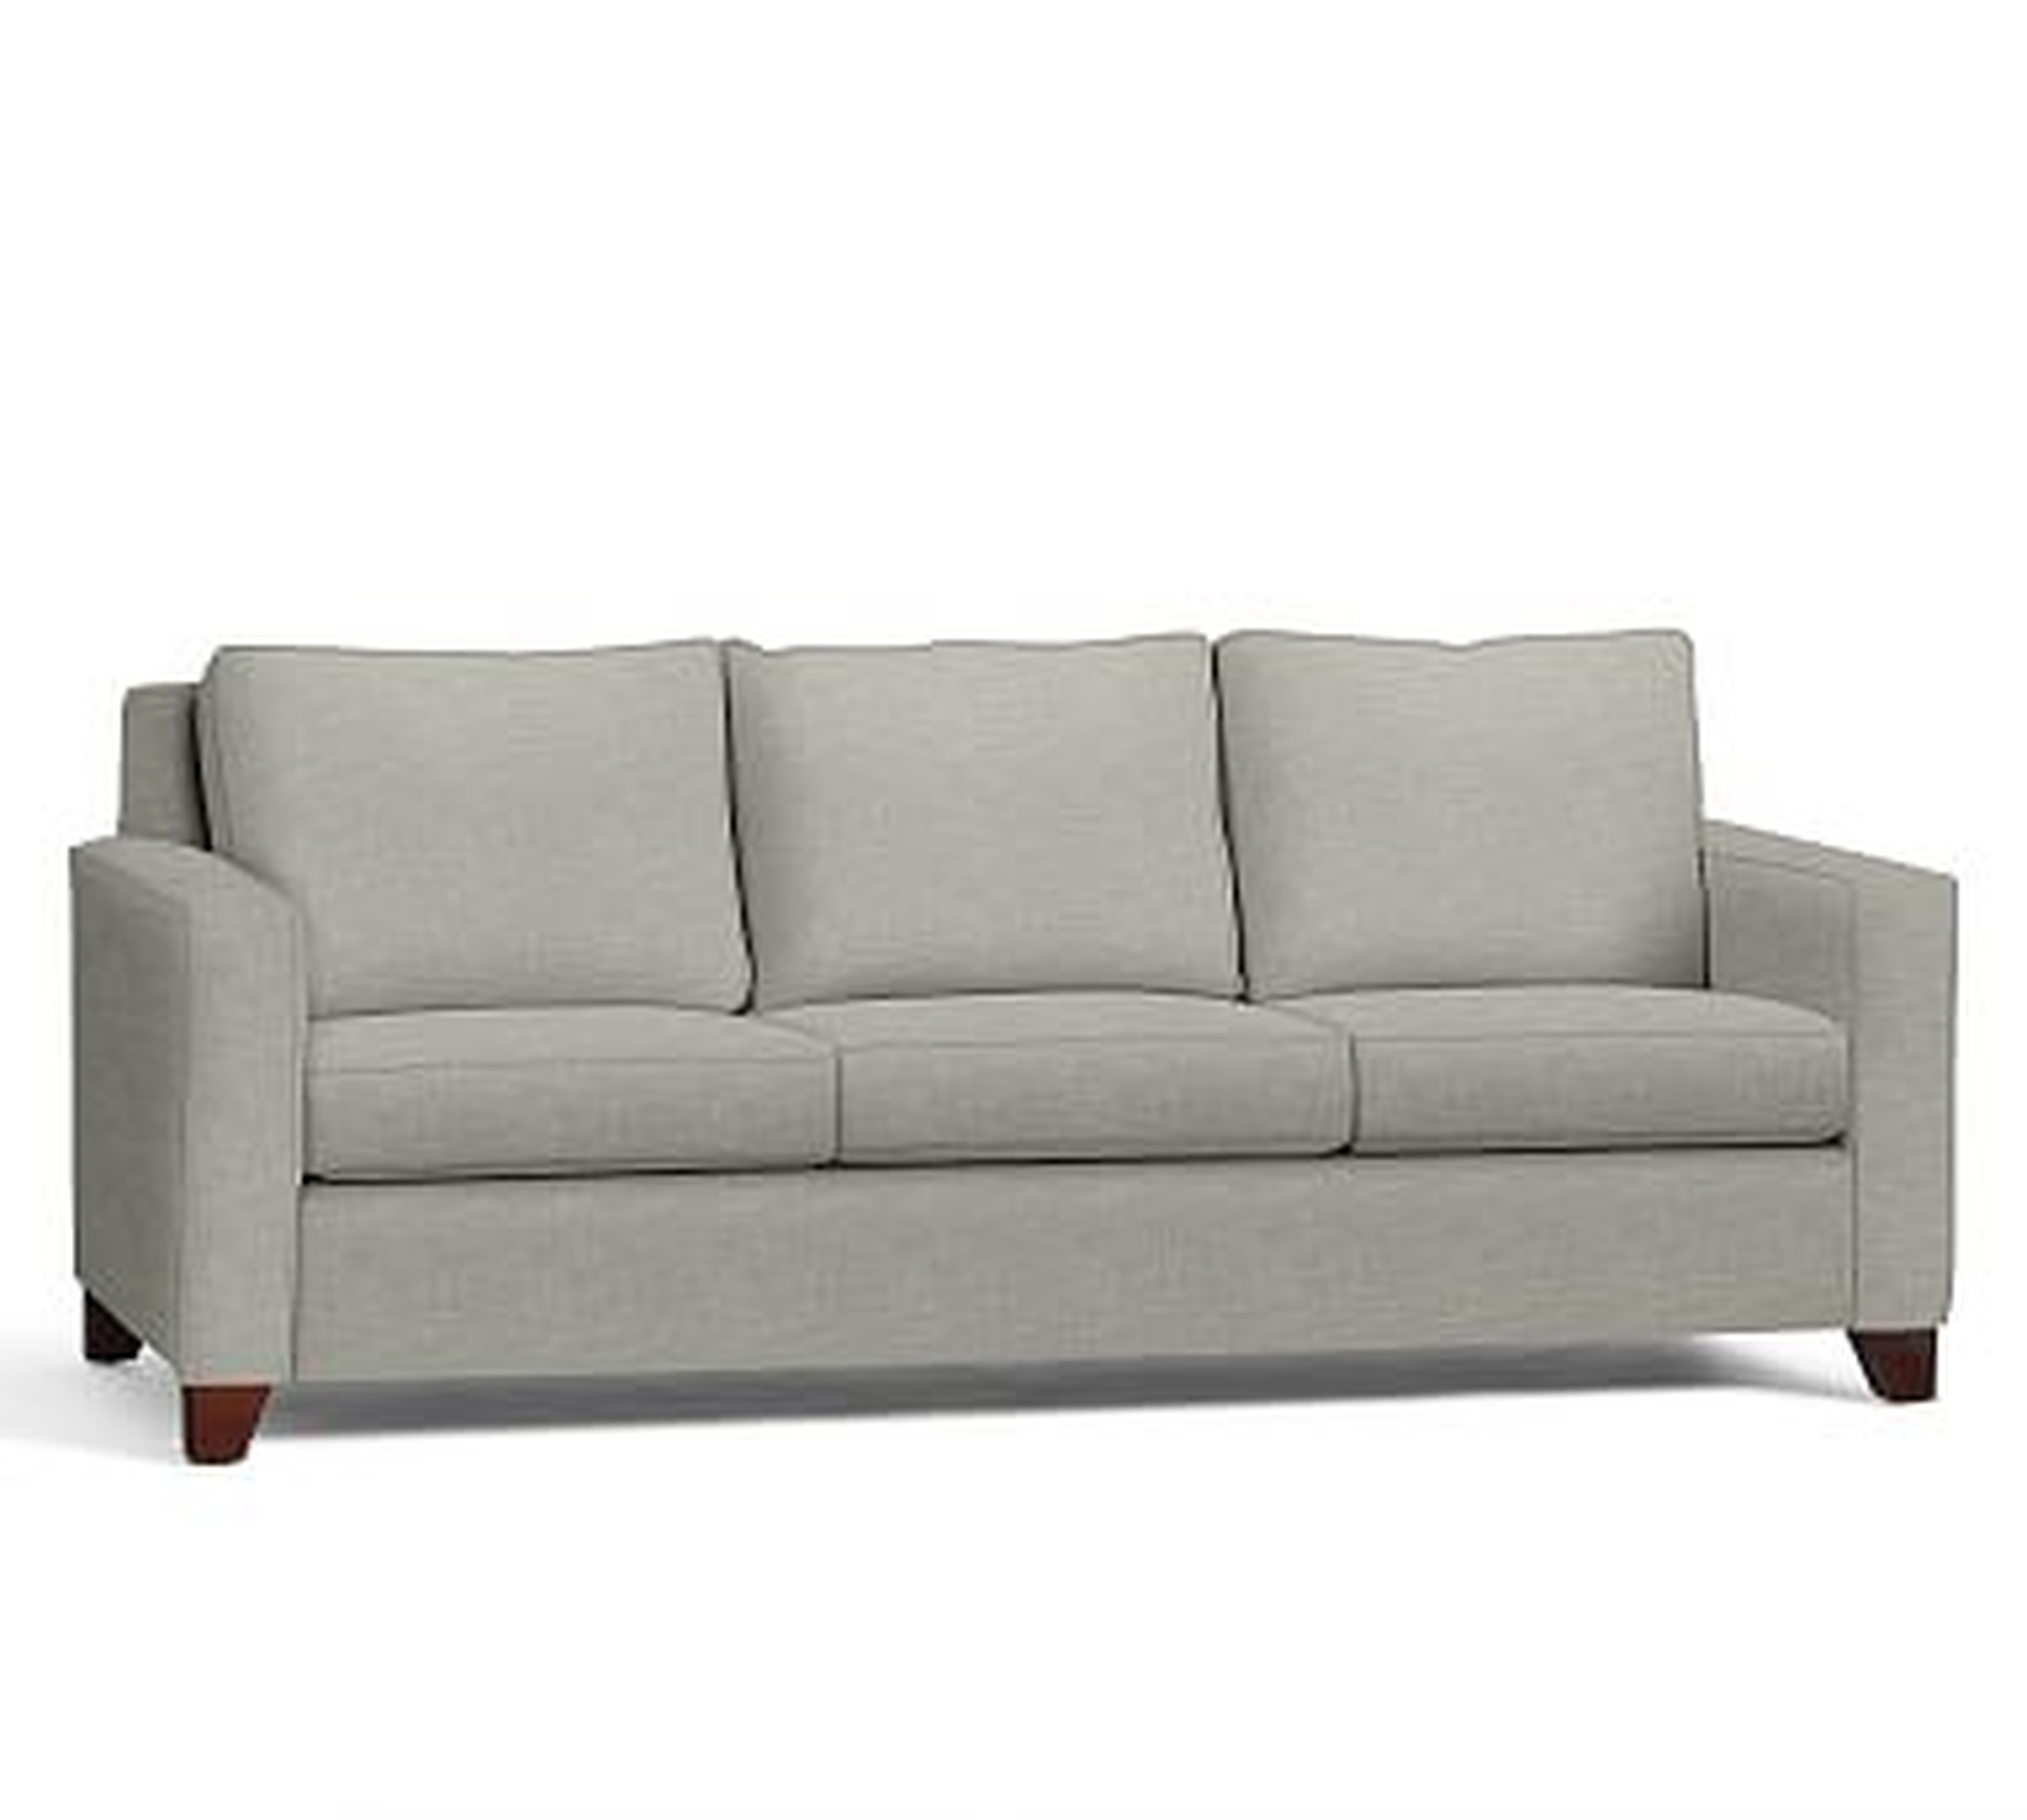 Cameron Square Arm Upholstered Grand Sofa 96" 3-Seater, Polyester Wrapped Cushions, Premium Performance Basketweave Light Gray - Pottery Barn